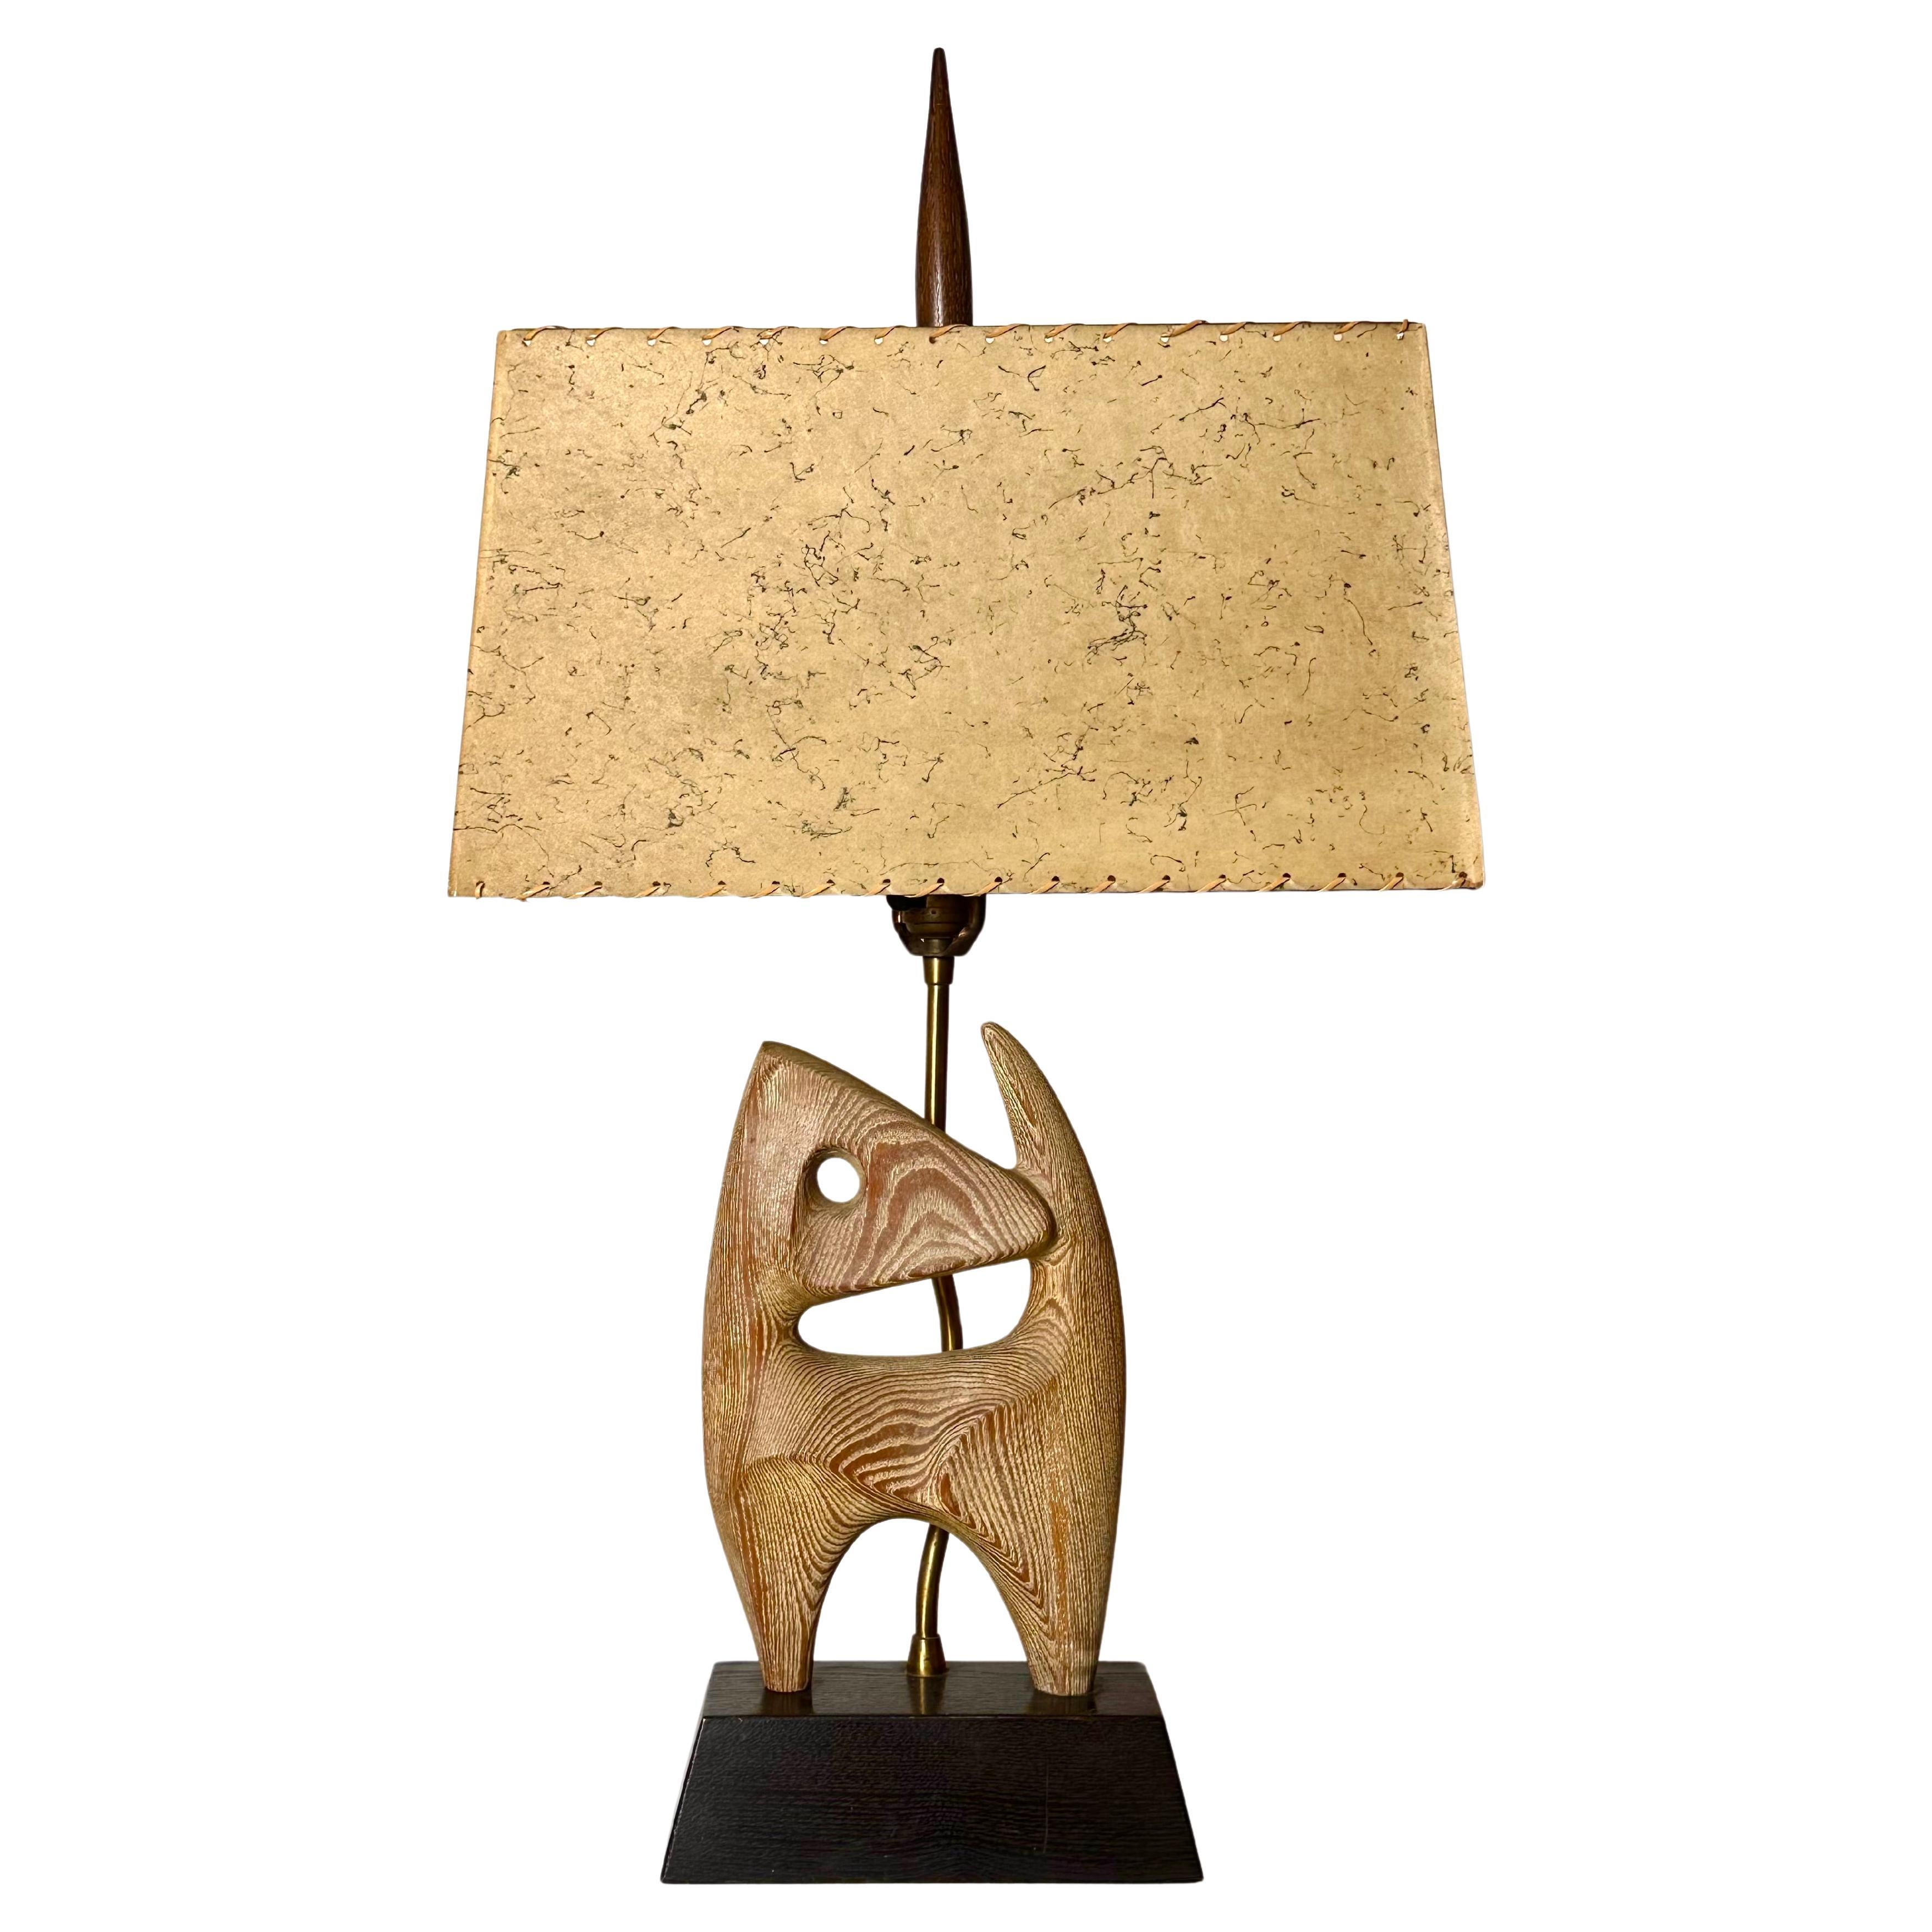 Yasha Heifetz The Puppy Cerused Oak Abstract Modernist Table Lamp USA 1950s For Sale